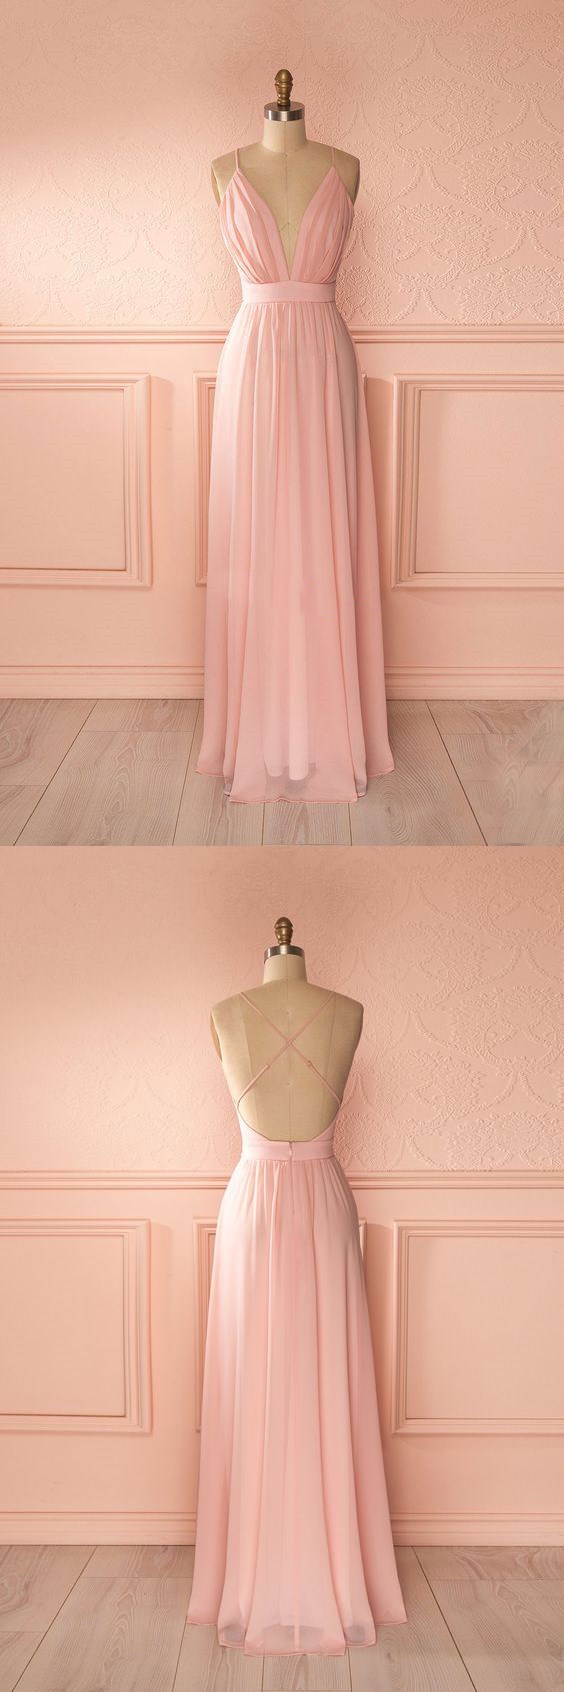 Simple Pink A-line Spaghetti Straps Long Prom Dress